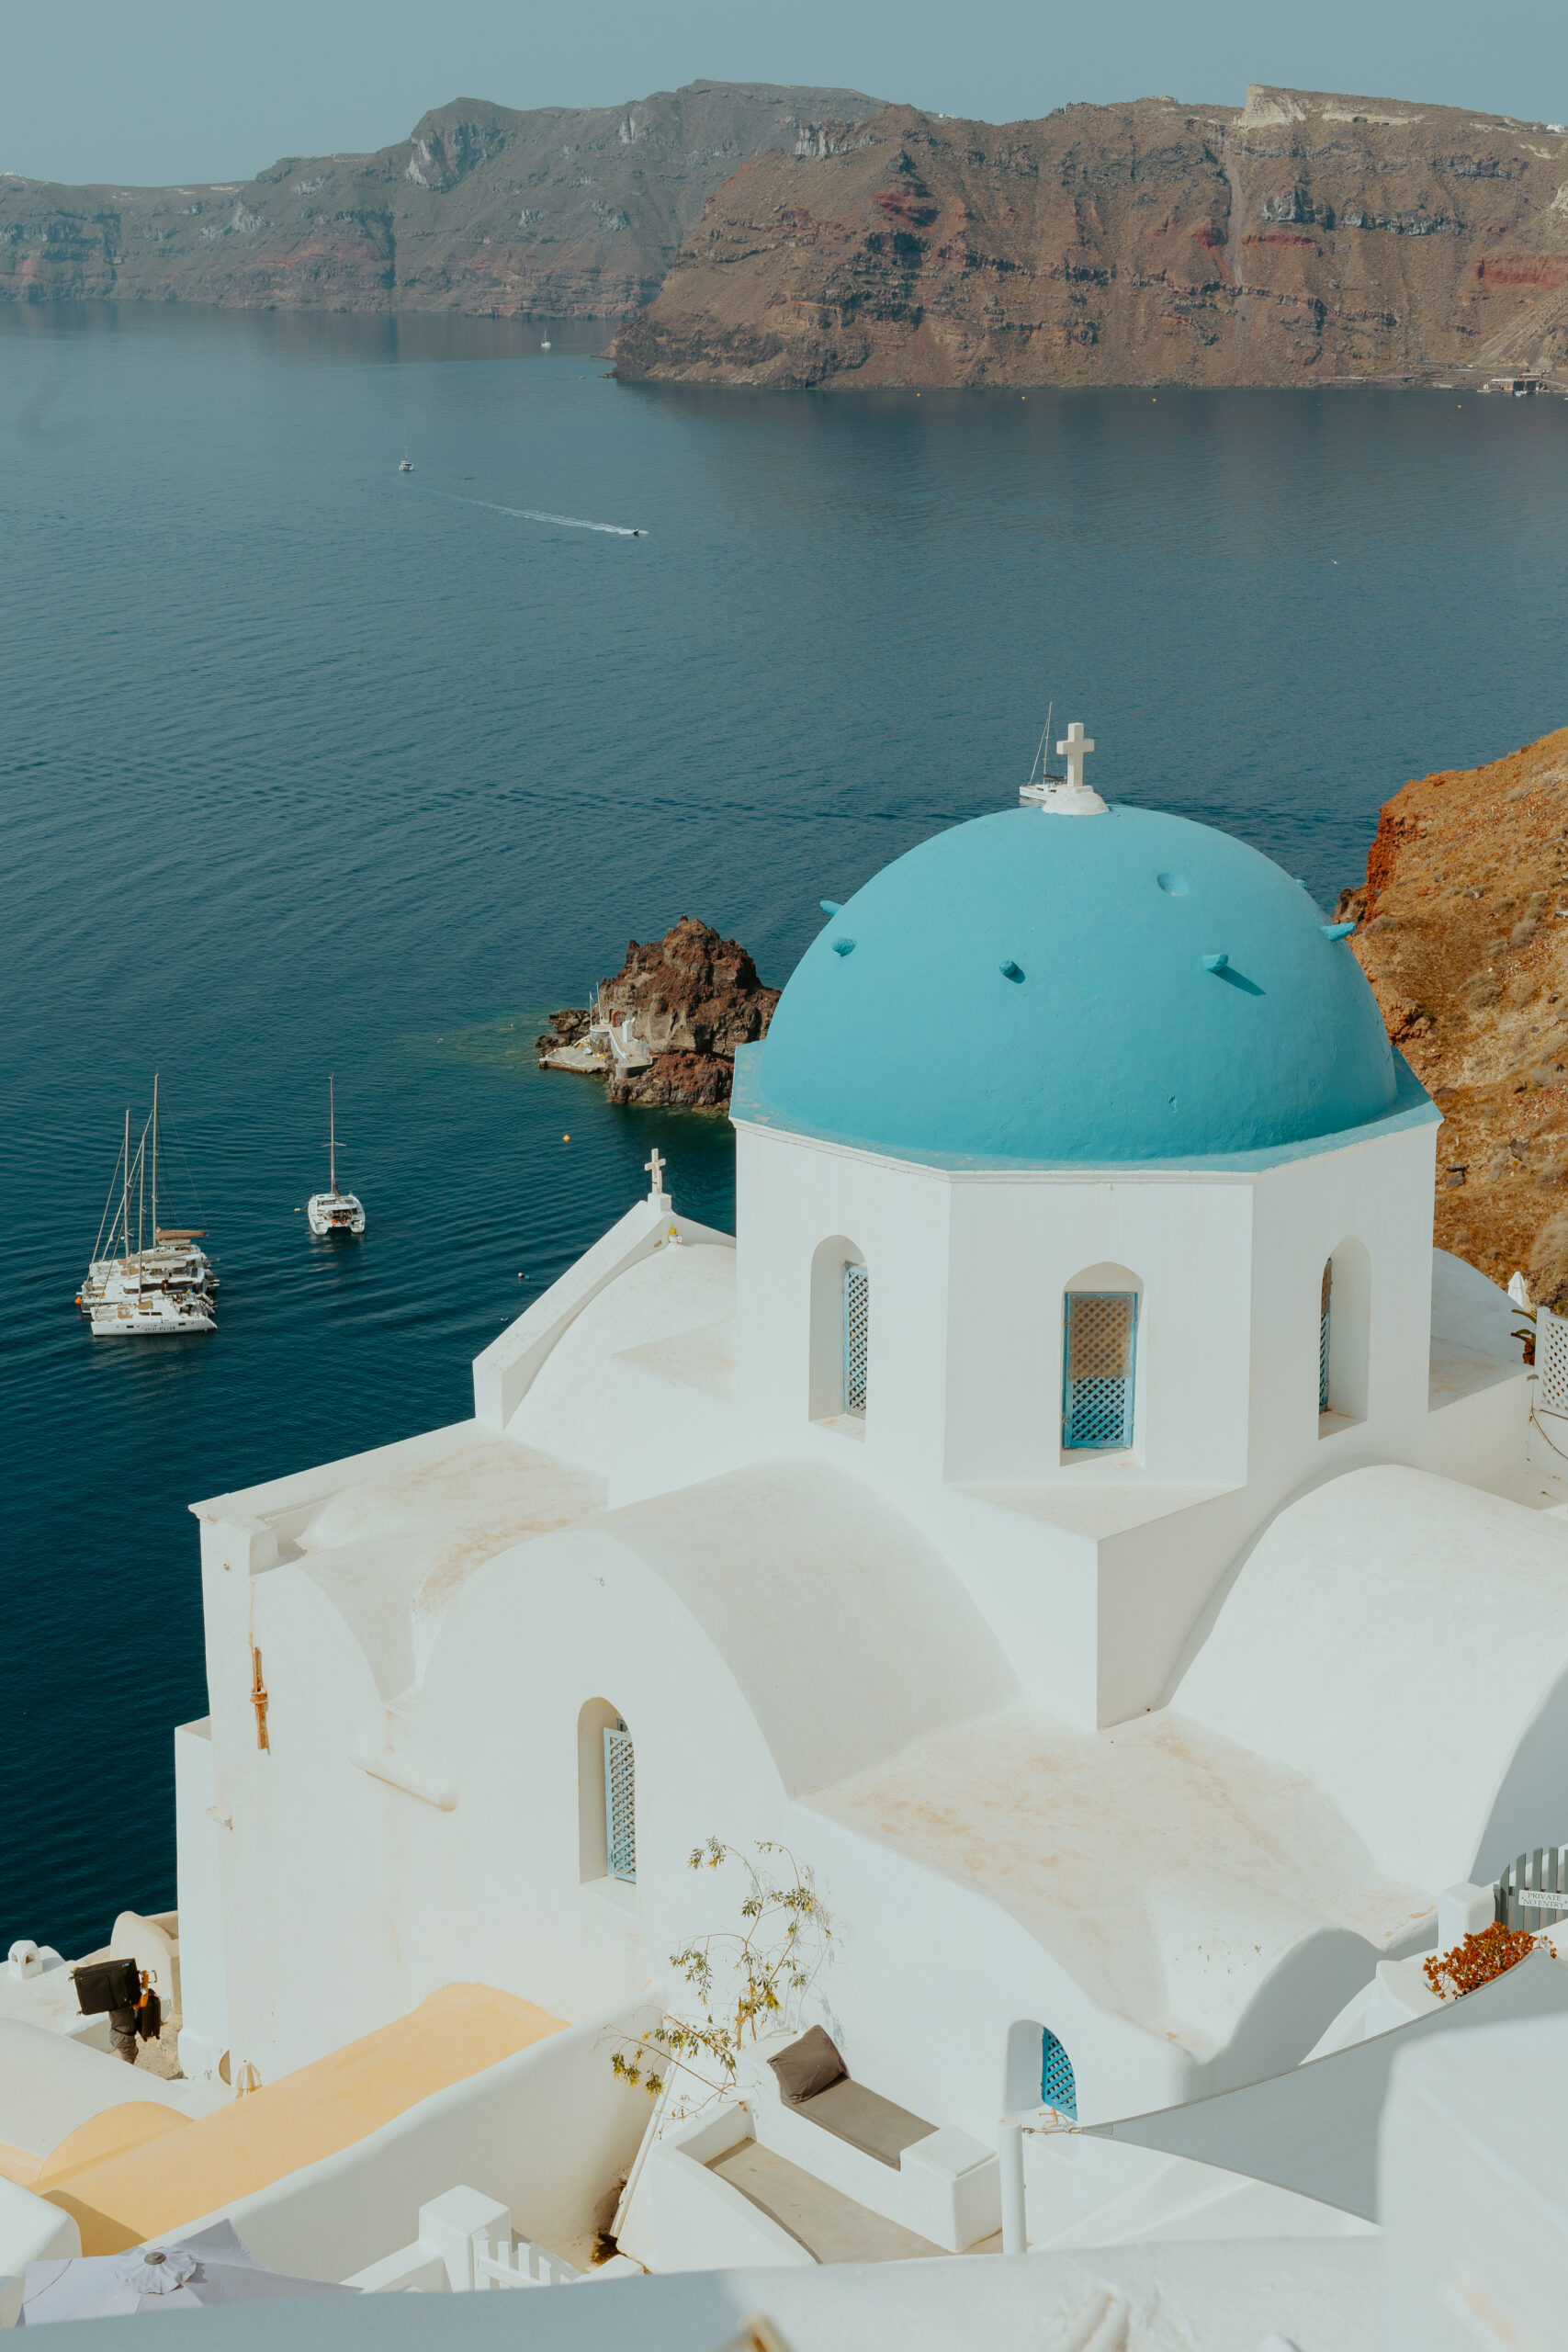 Exploring Oia village of Santorini and dining at Melenio Pastry